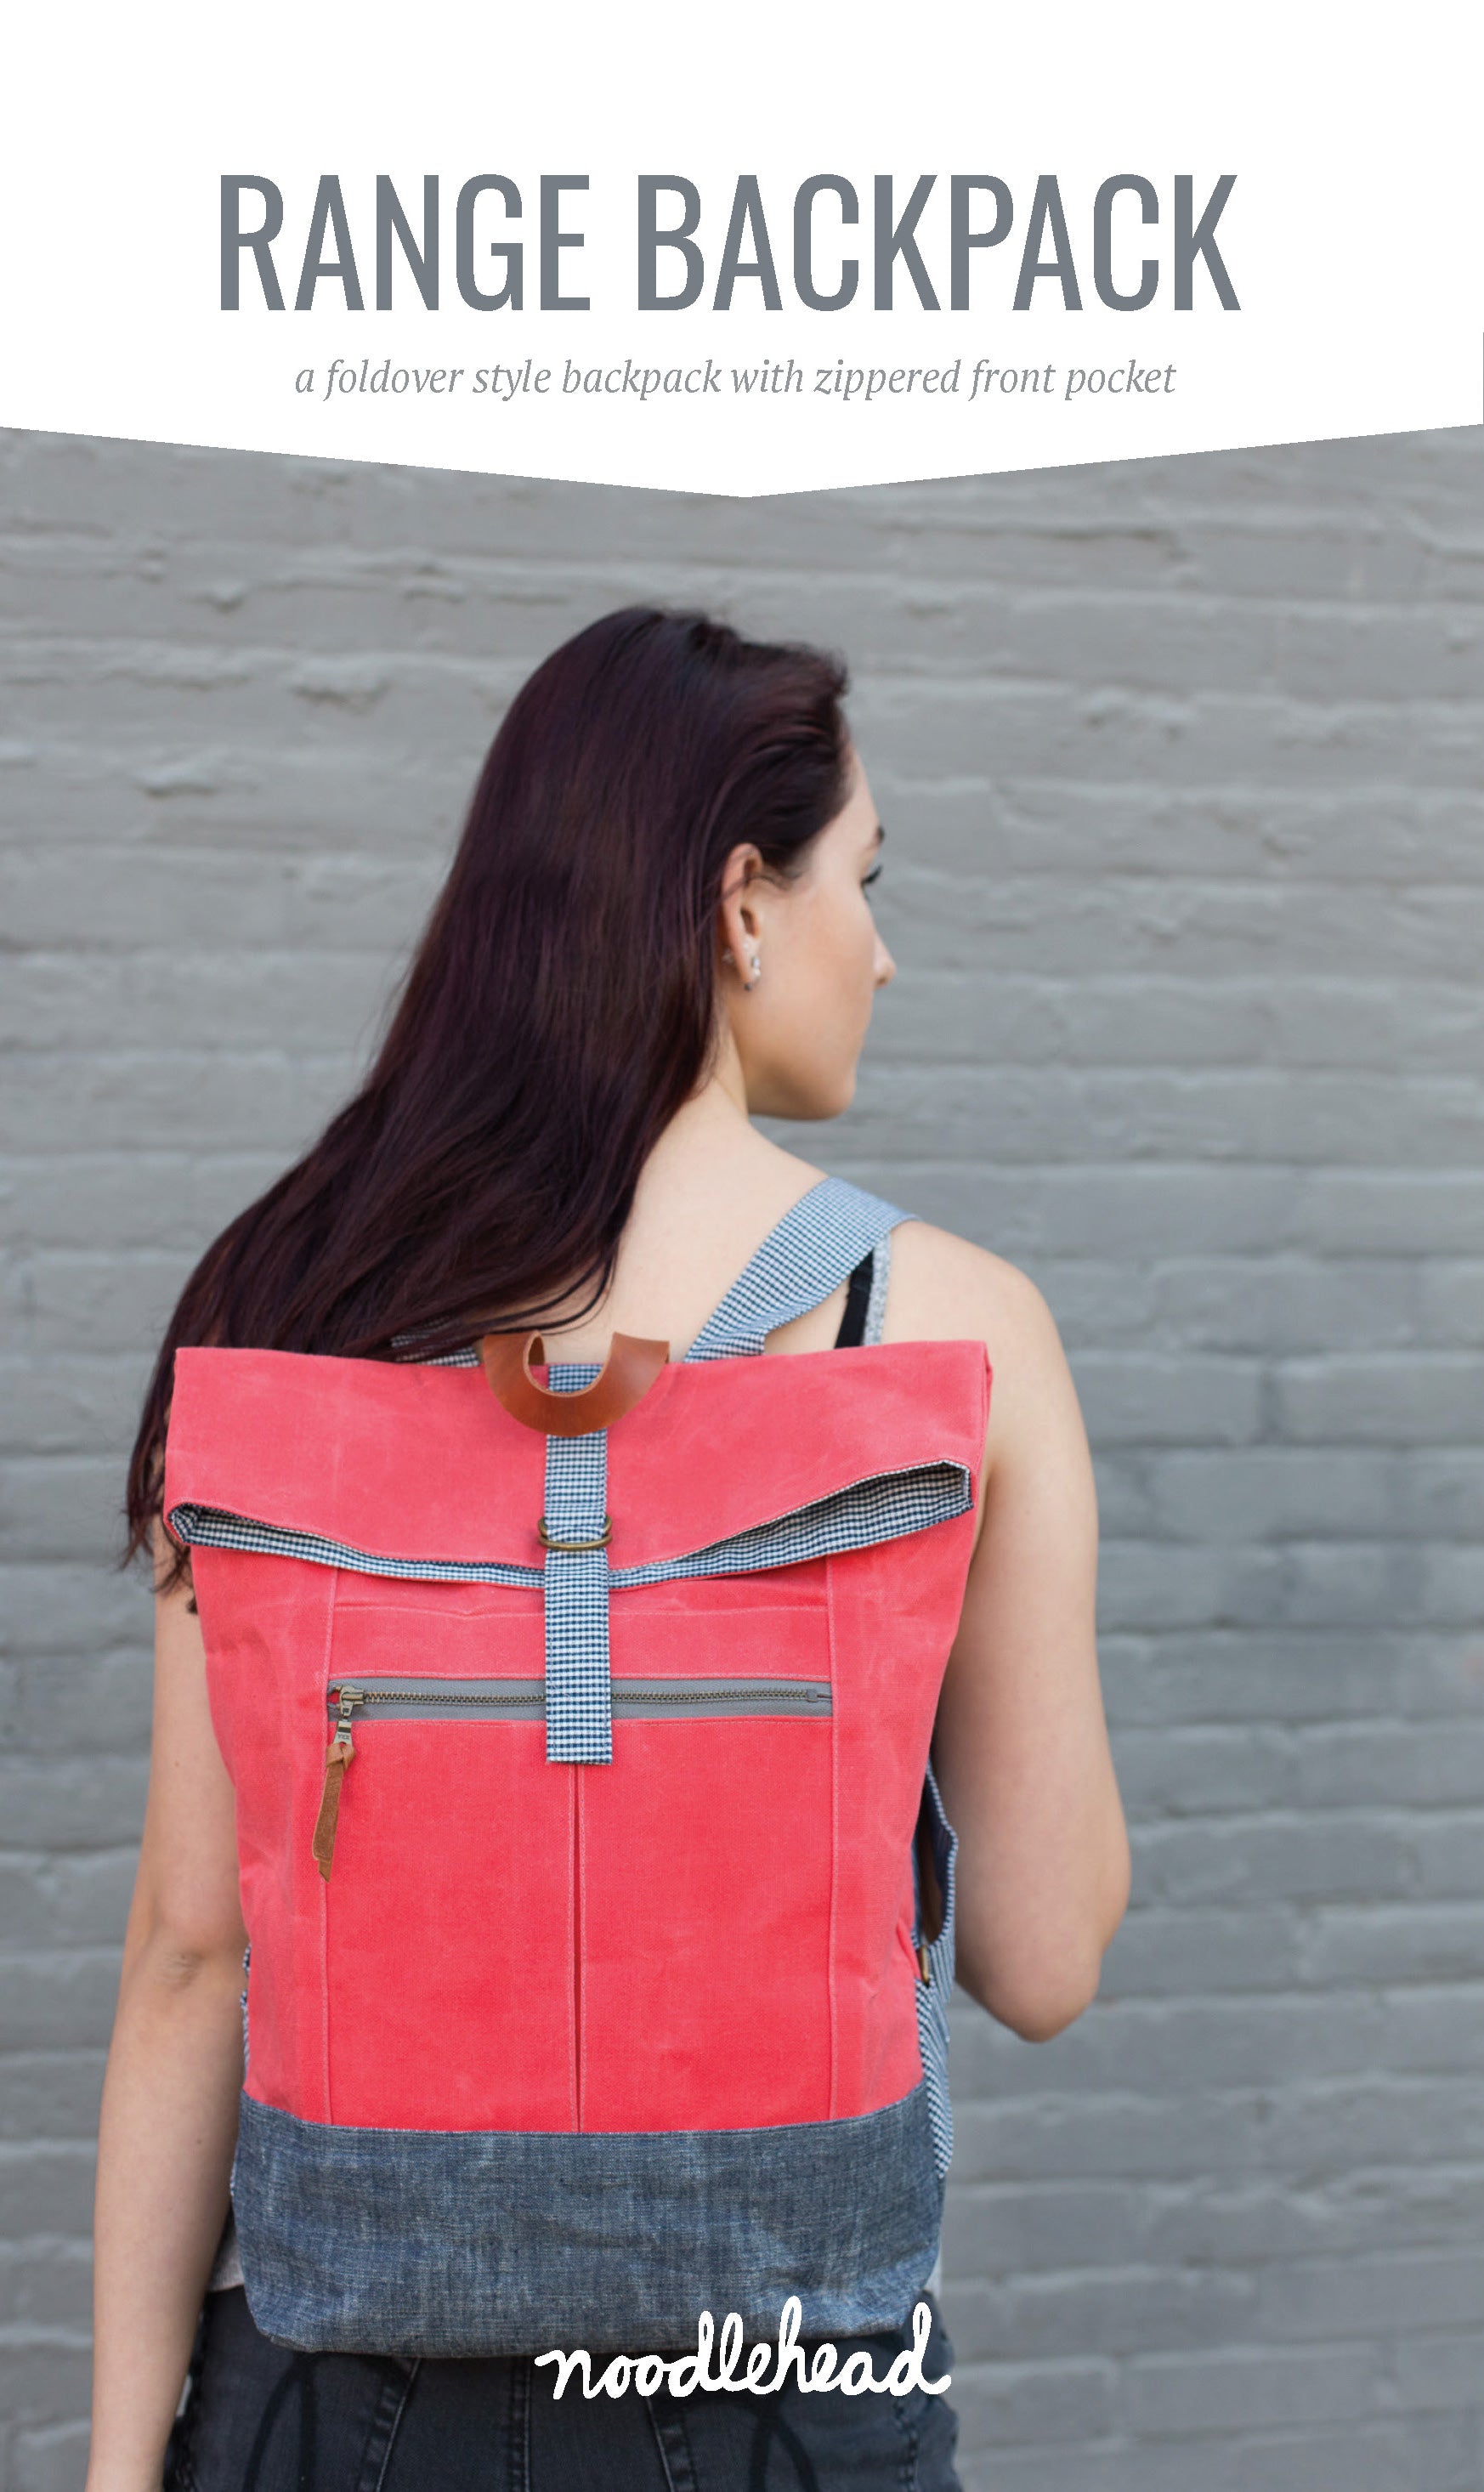 Range Backpack Sewing Pattern by Noodlehead